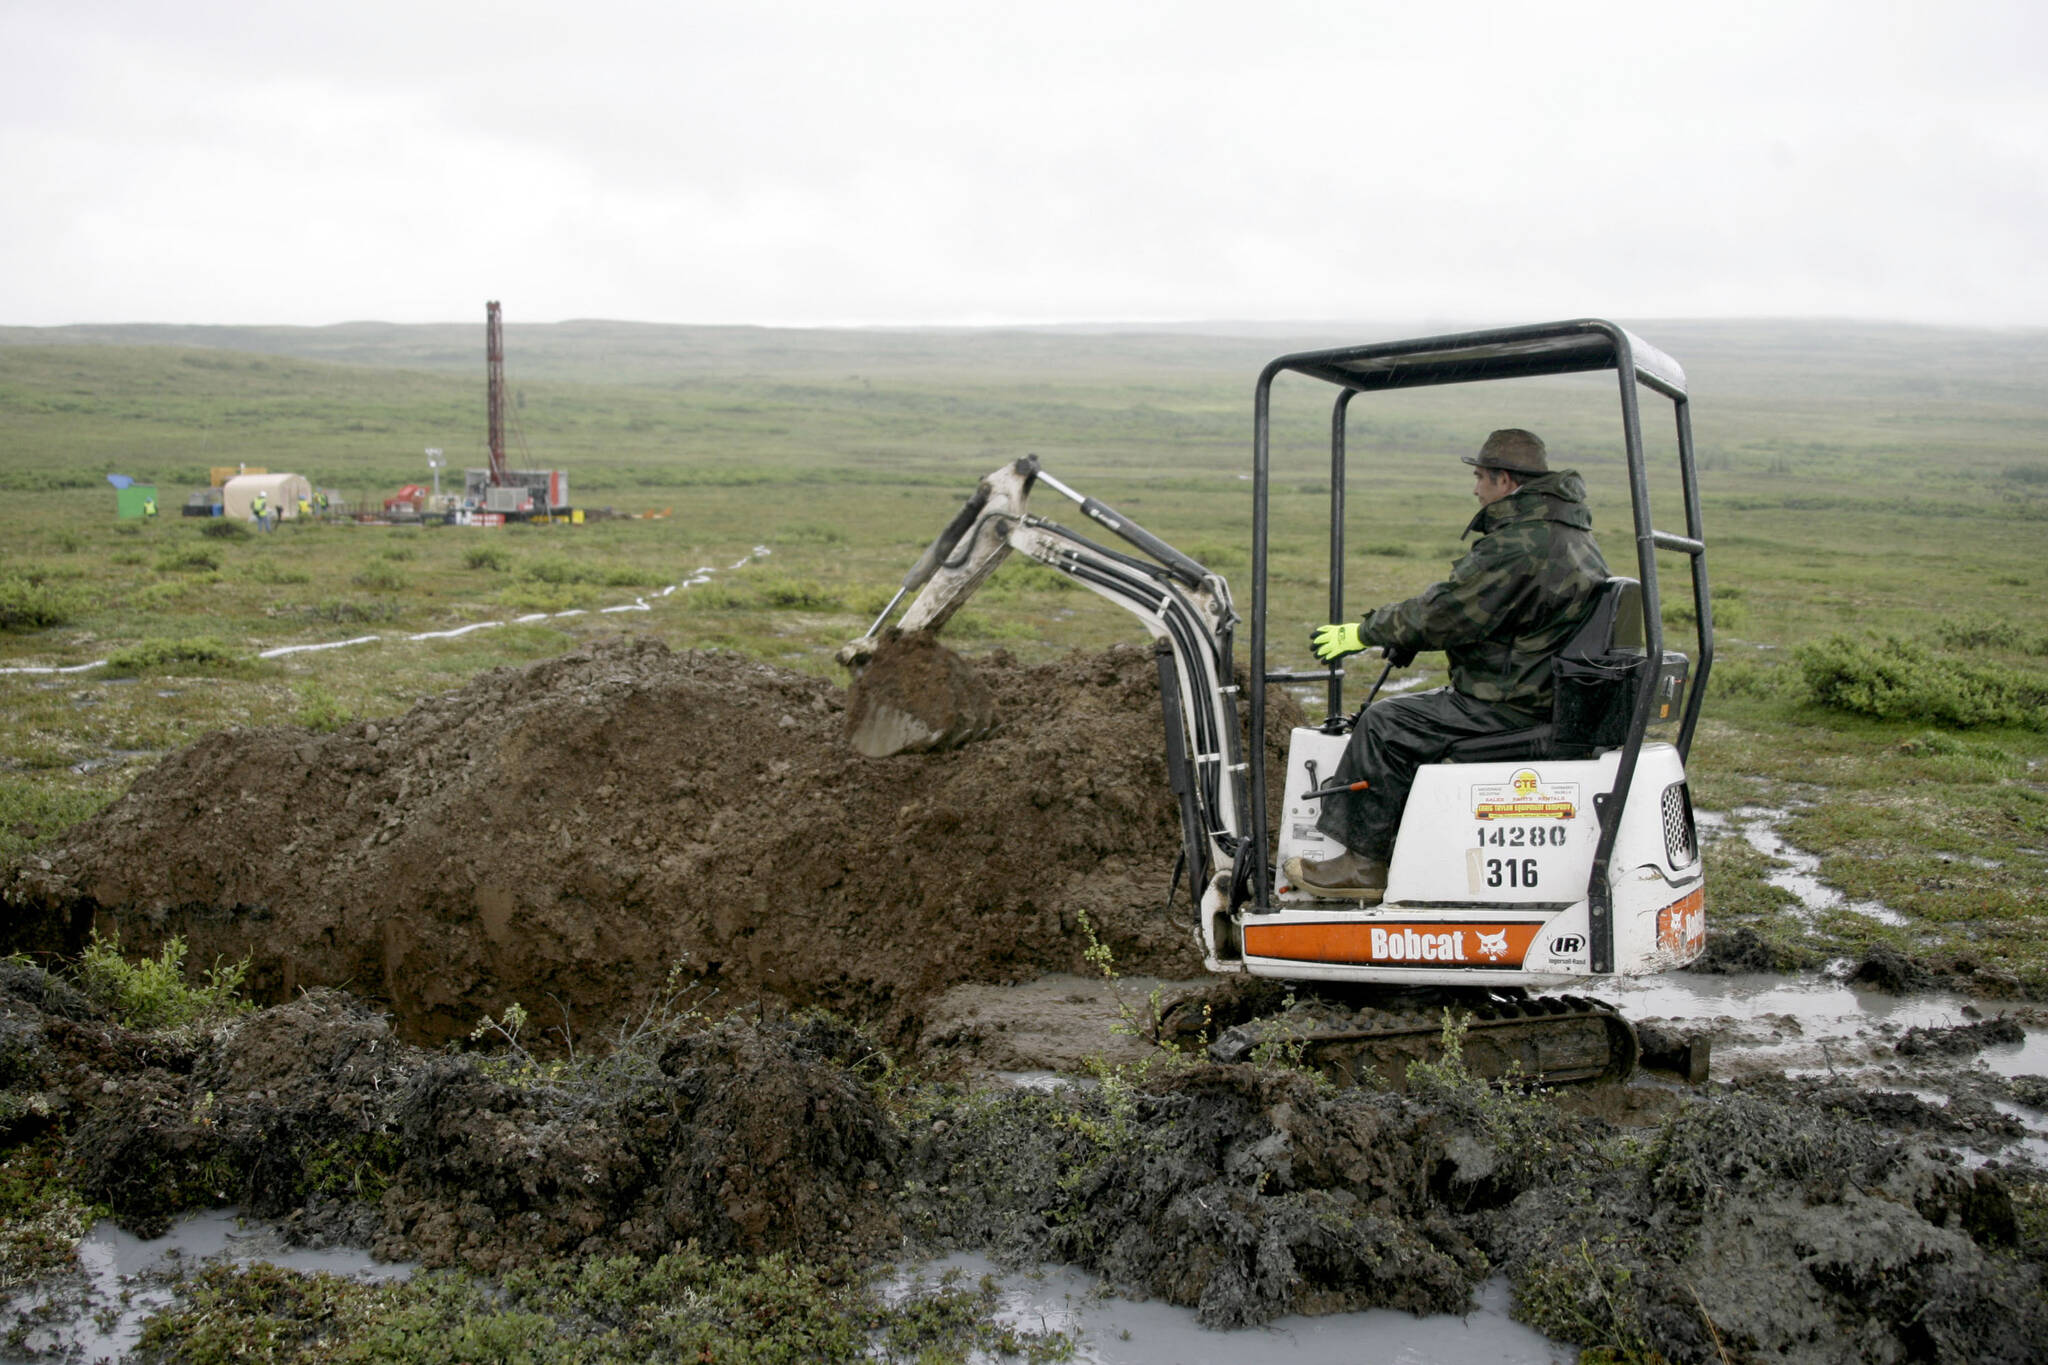 AP Photo / Al Grillo
A worker with the Pebble Mine project digs in the Bristol Bay region of Alaska near the village of Iliamma, Alaska. The U.S. Environmental Protection Agency announced Thursday, Sept. 9, 2021, it would seek to restart a process that could restrict mining in Alaska’s Bristol Bay region, which is renowned for its salmon runs. The announcement is the latest in a long-running dispute over a proposed copper-and-gold mine in the southwest Alaska region.